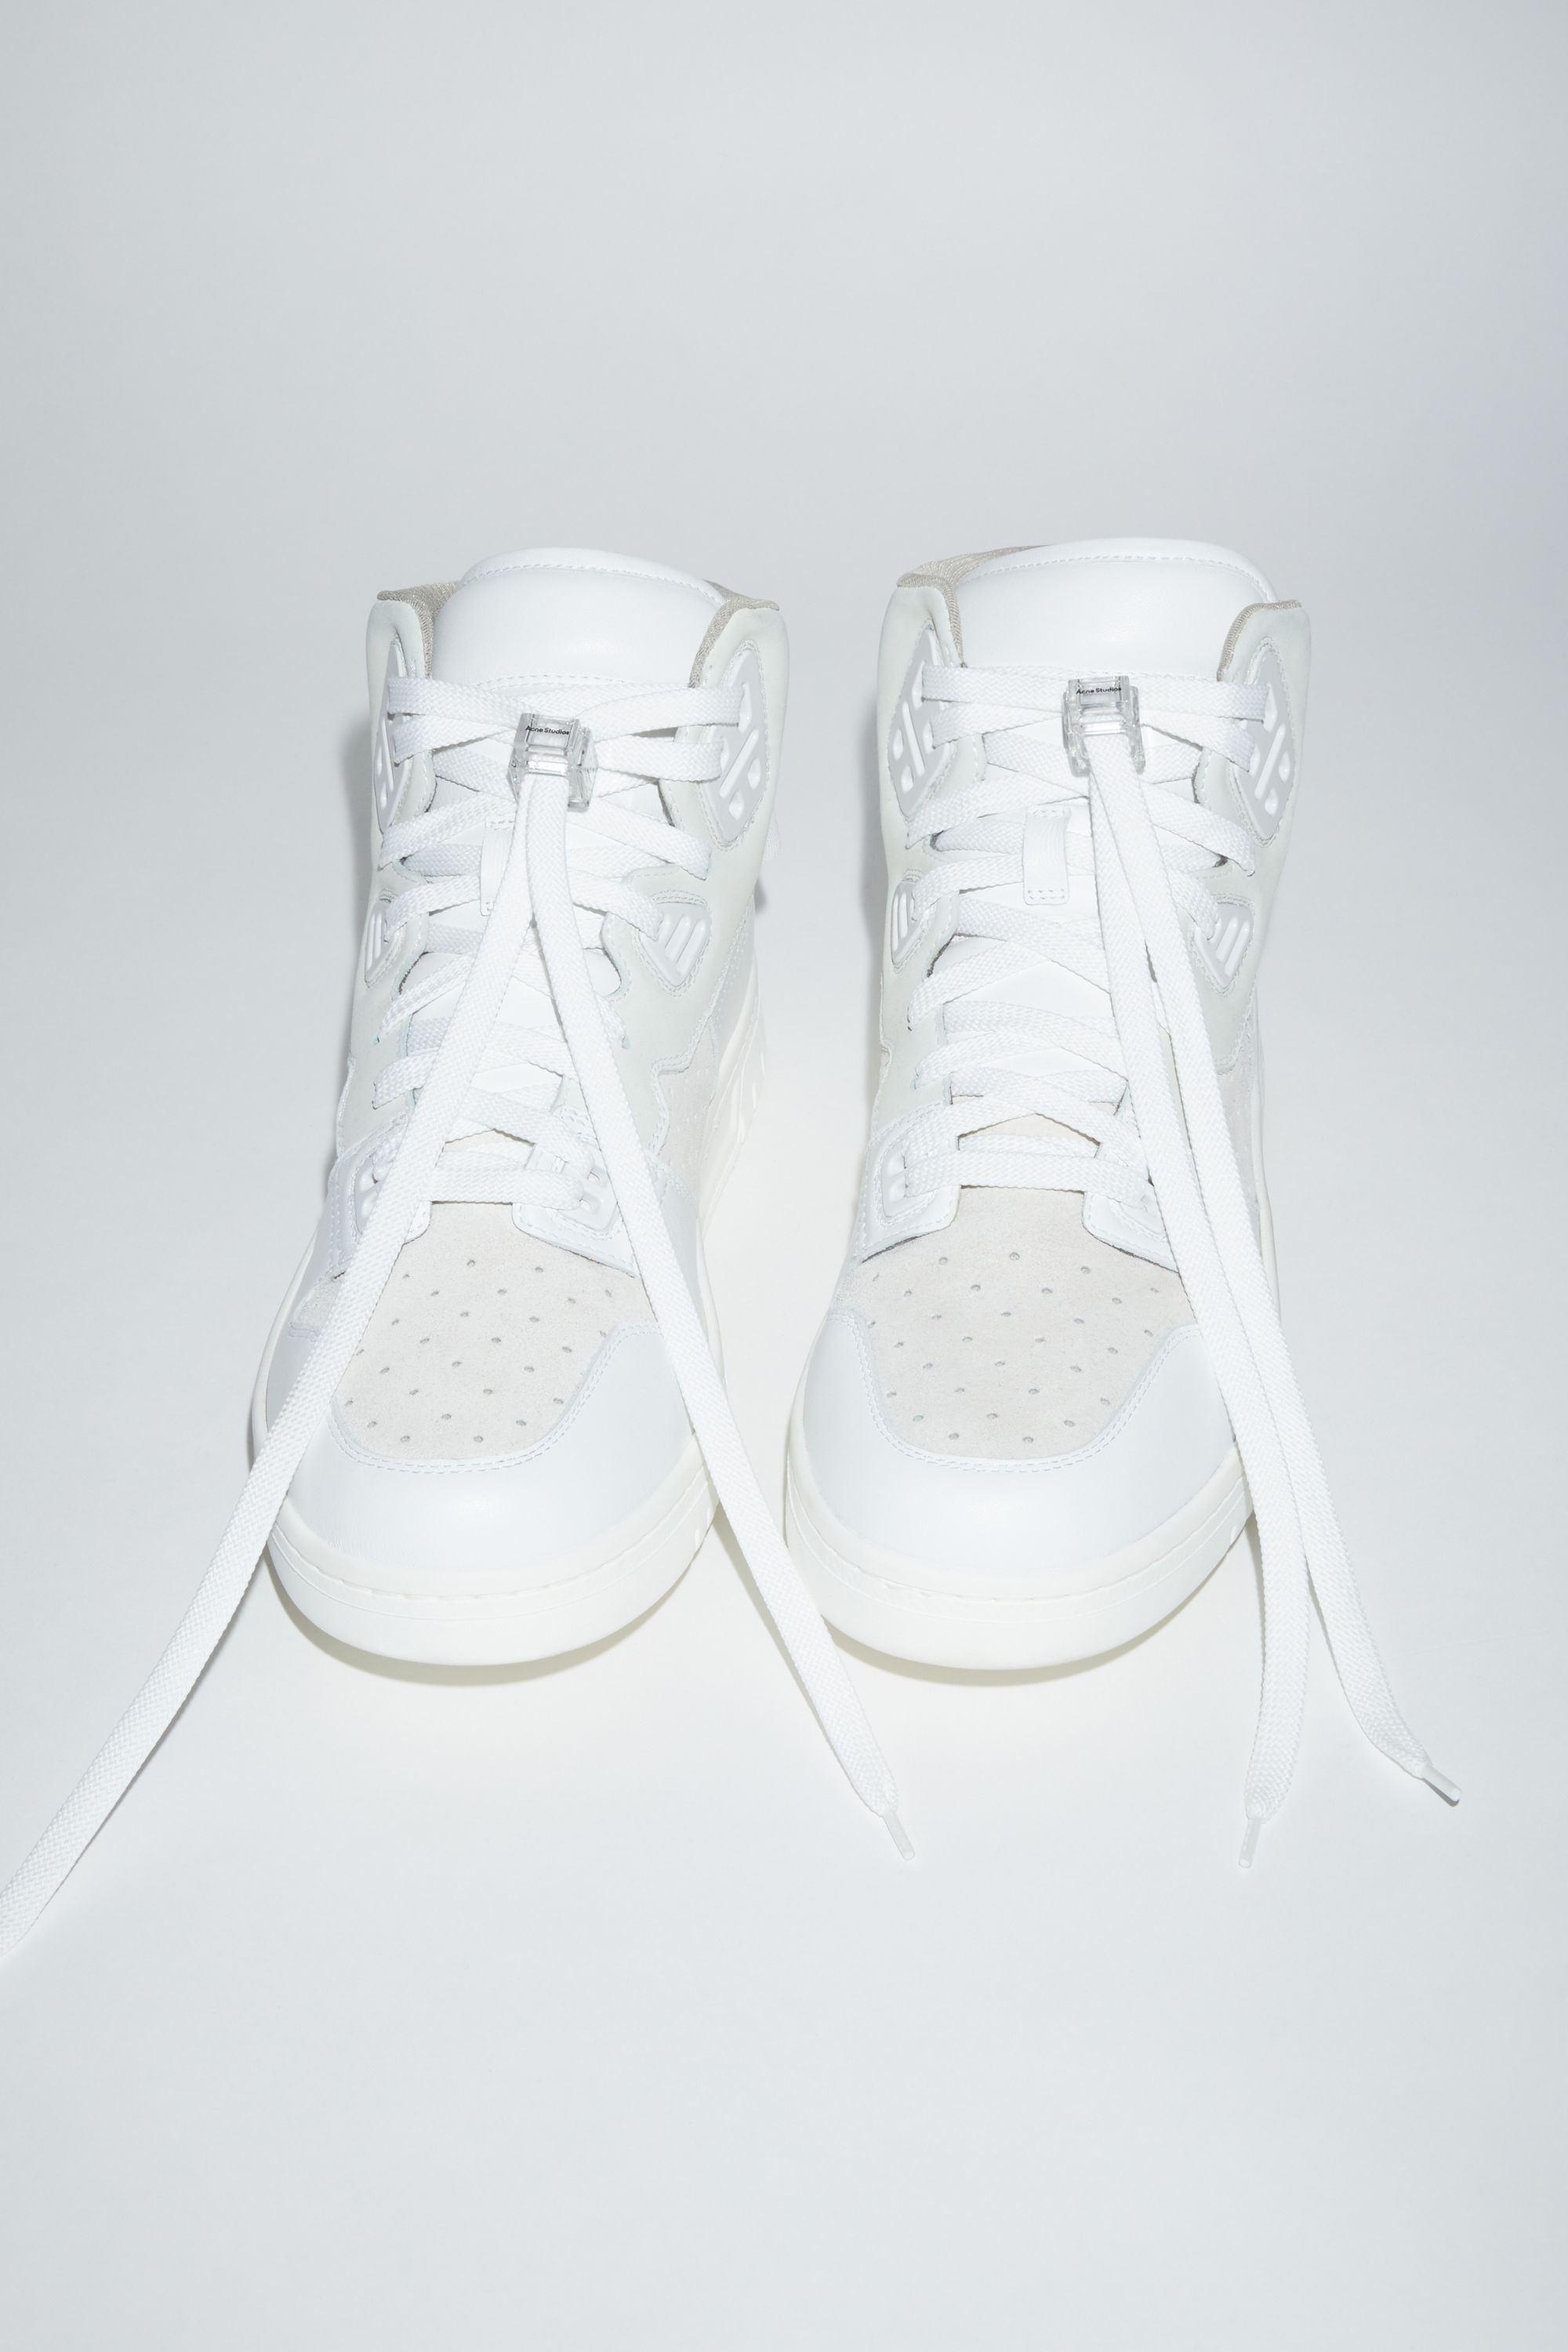 Update more than 146 acne studios white sneakers